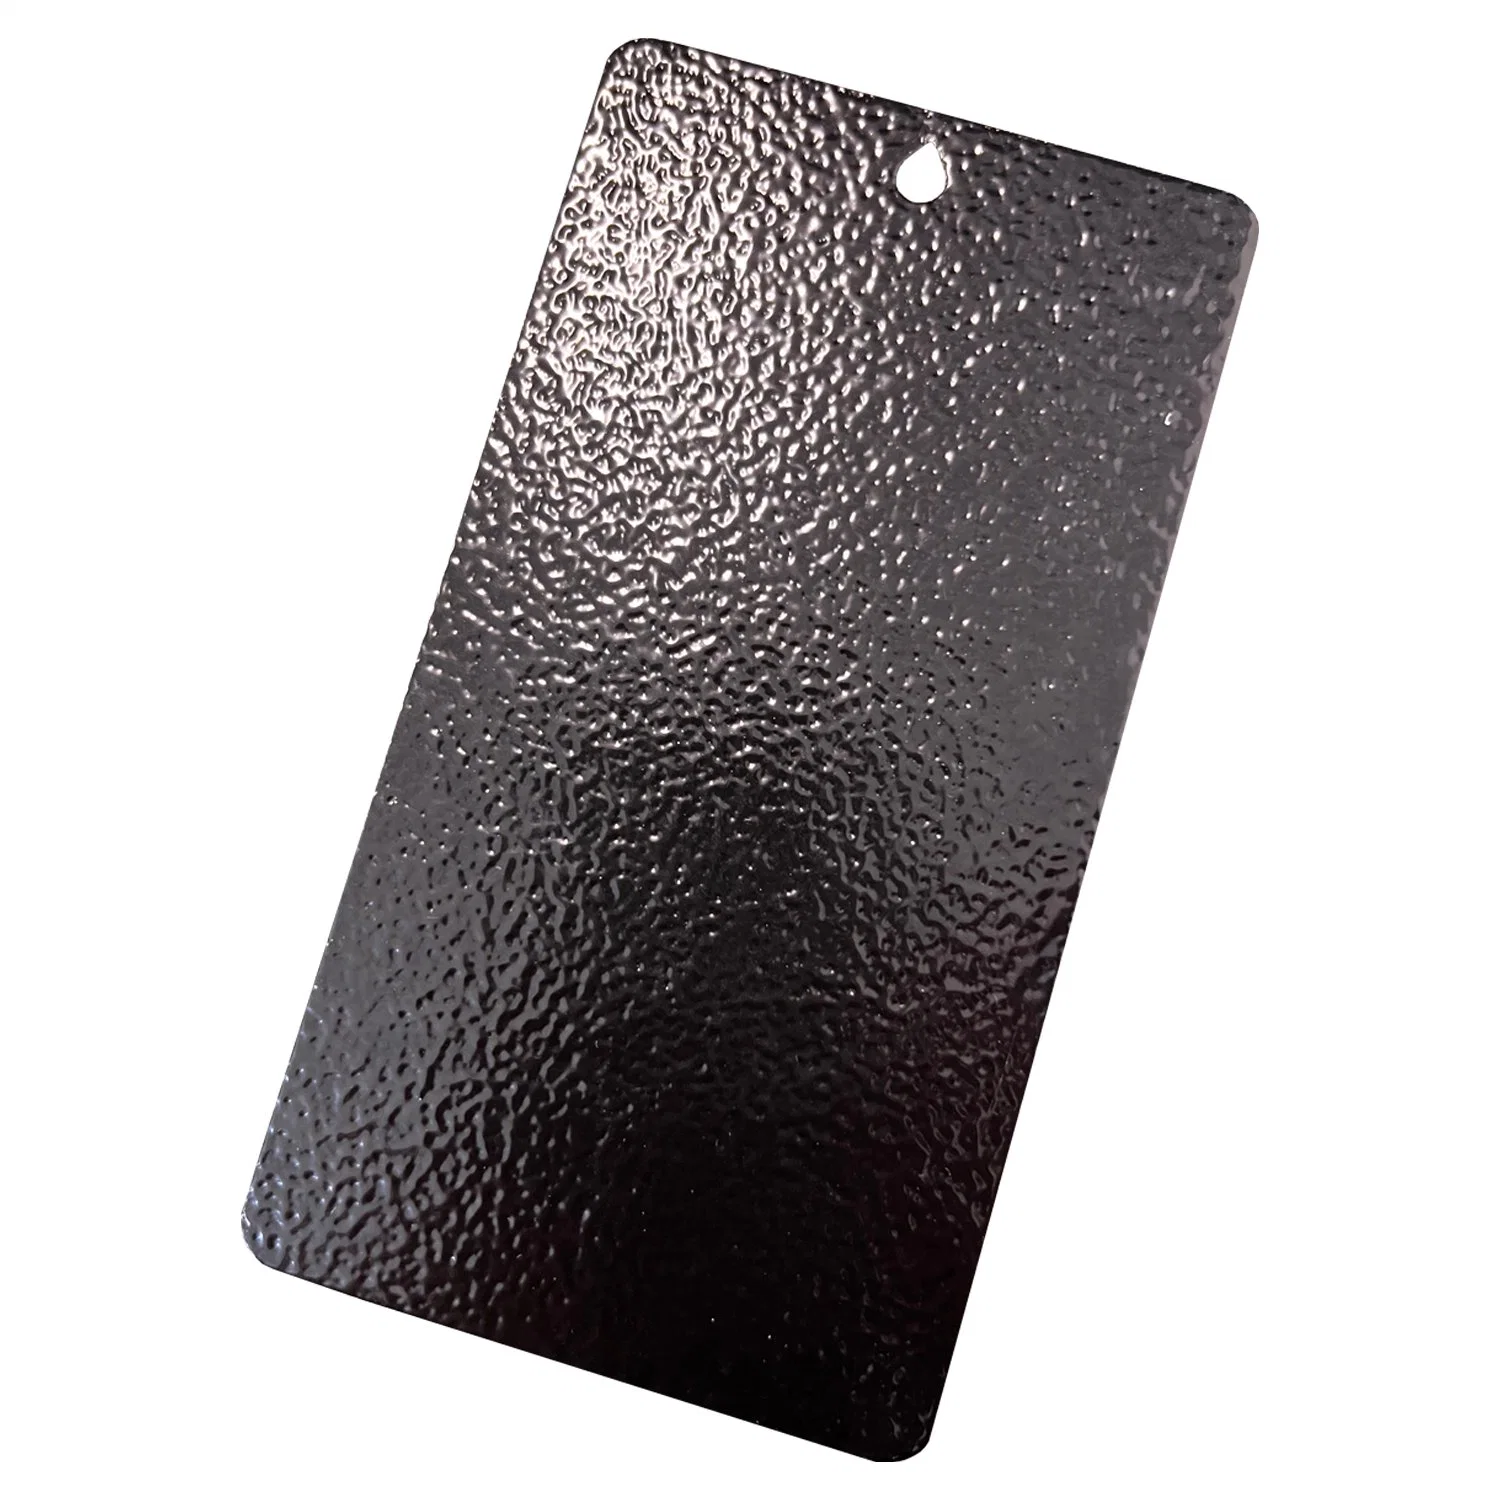 Wrinkle/Textured/Structured Black Ral 9005 9017 Polyester Powder Coatings for Exterior Use